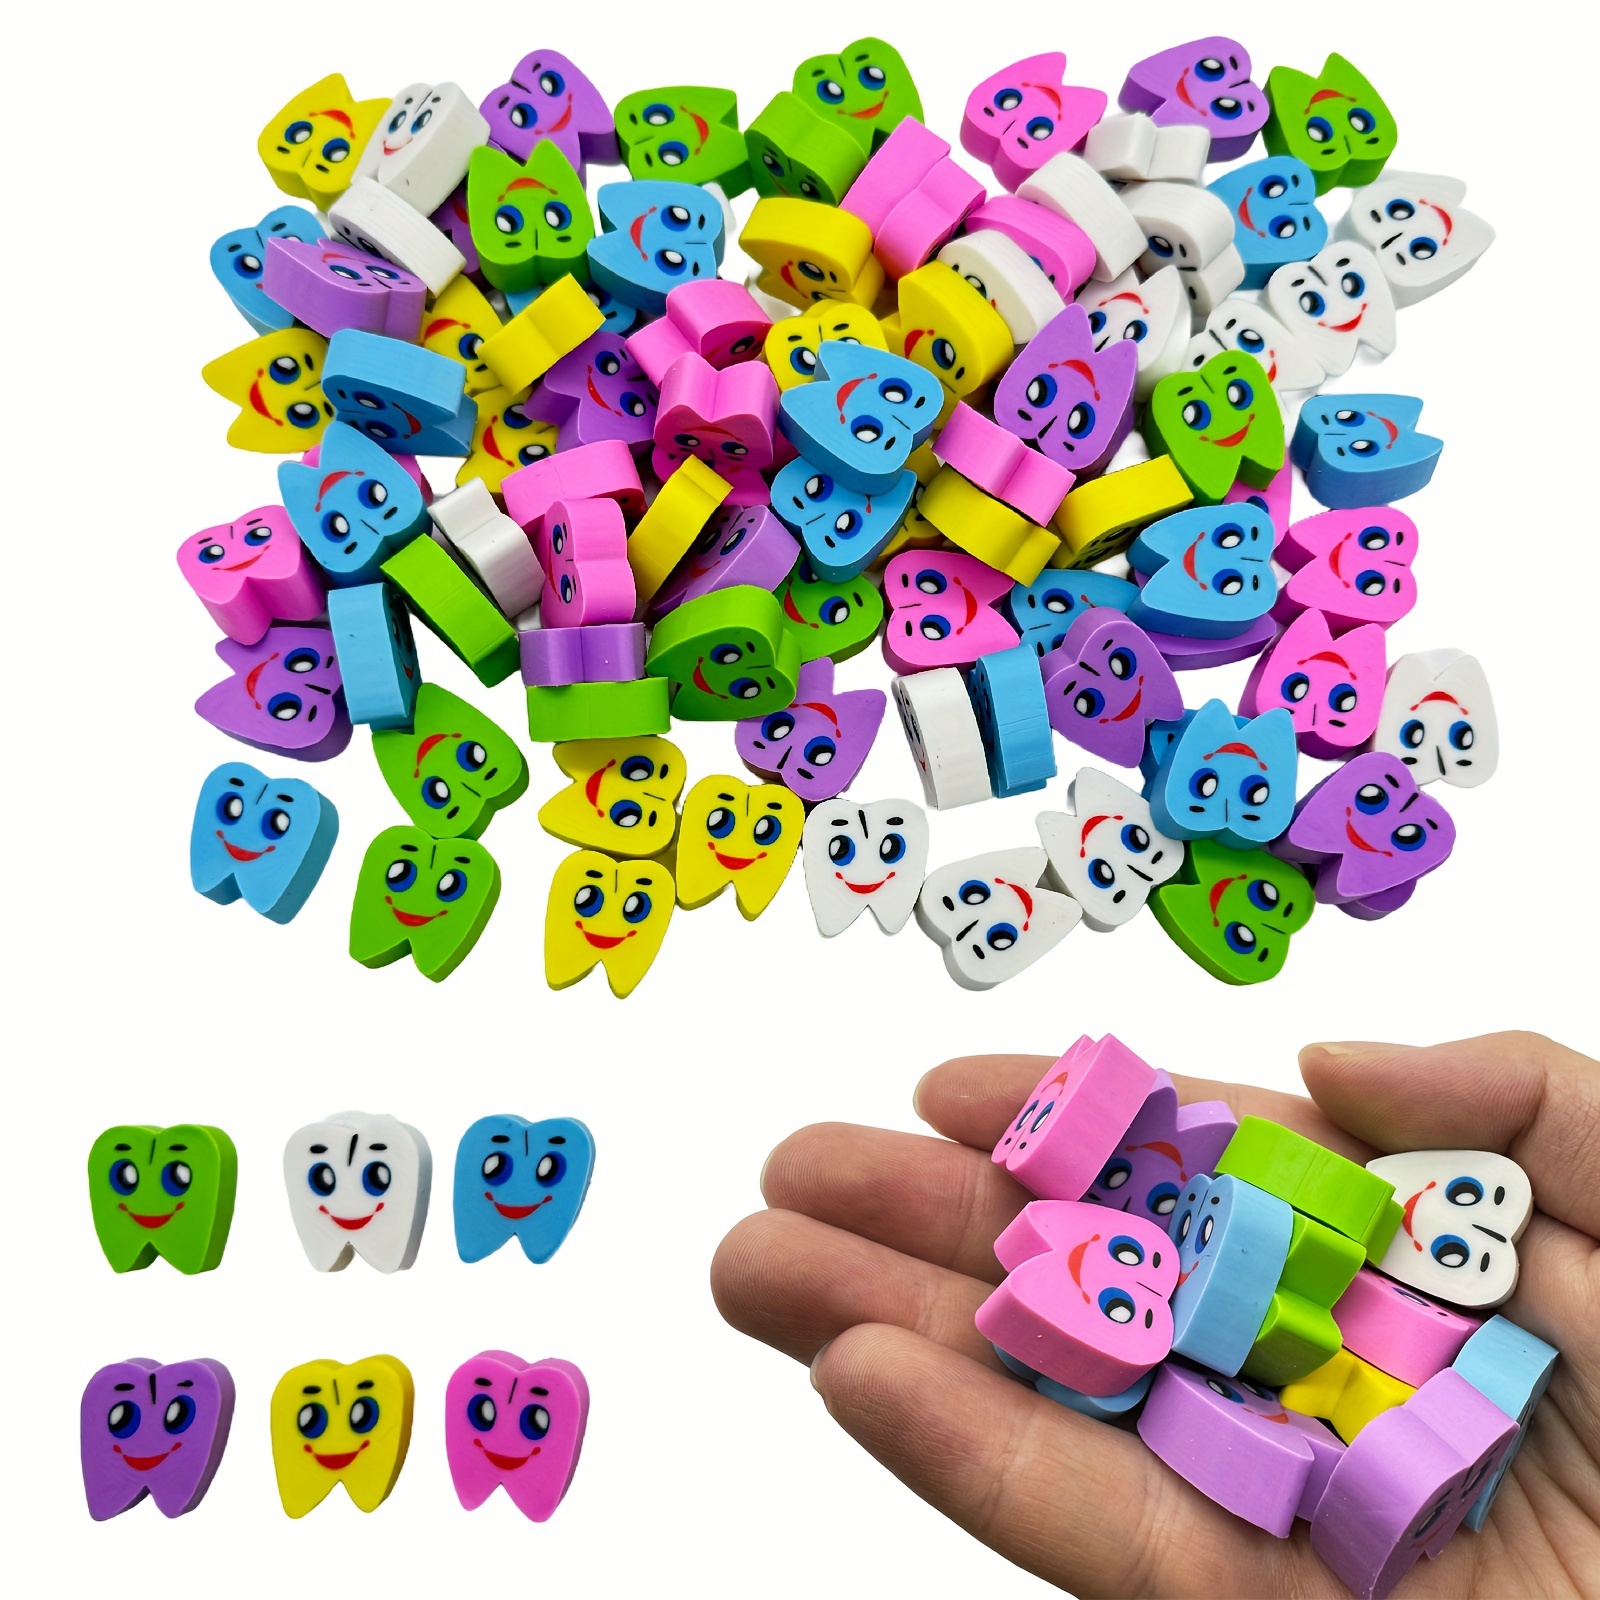 

30pcs Cube Erasers - Synthetic Rubber Molar Tooth Shaped Pencil Erasers For Classroom, Party Favors, School, Office Rewards